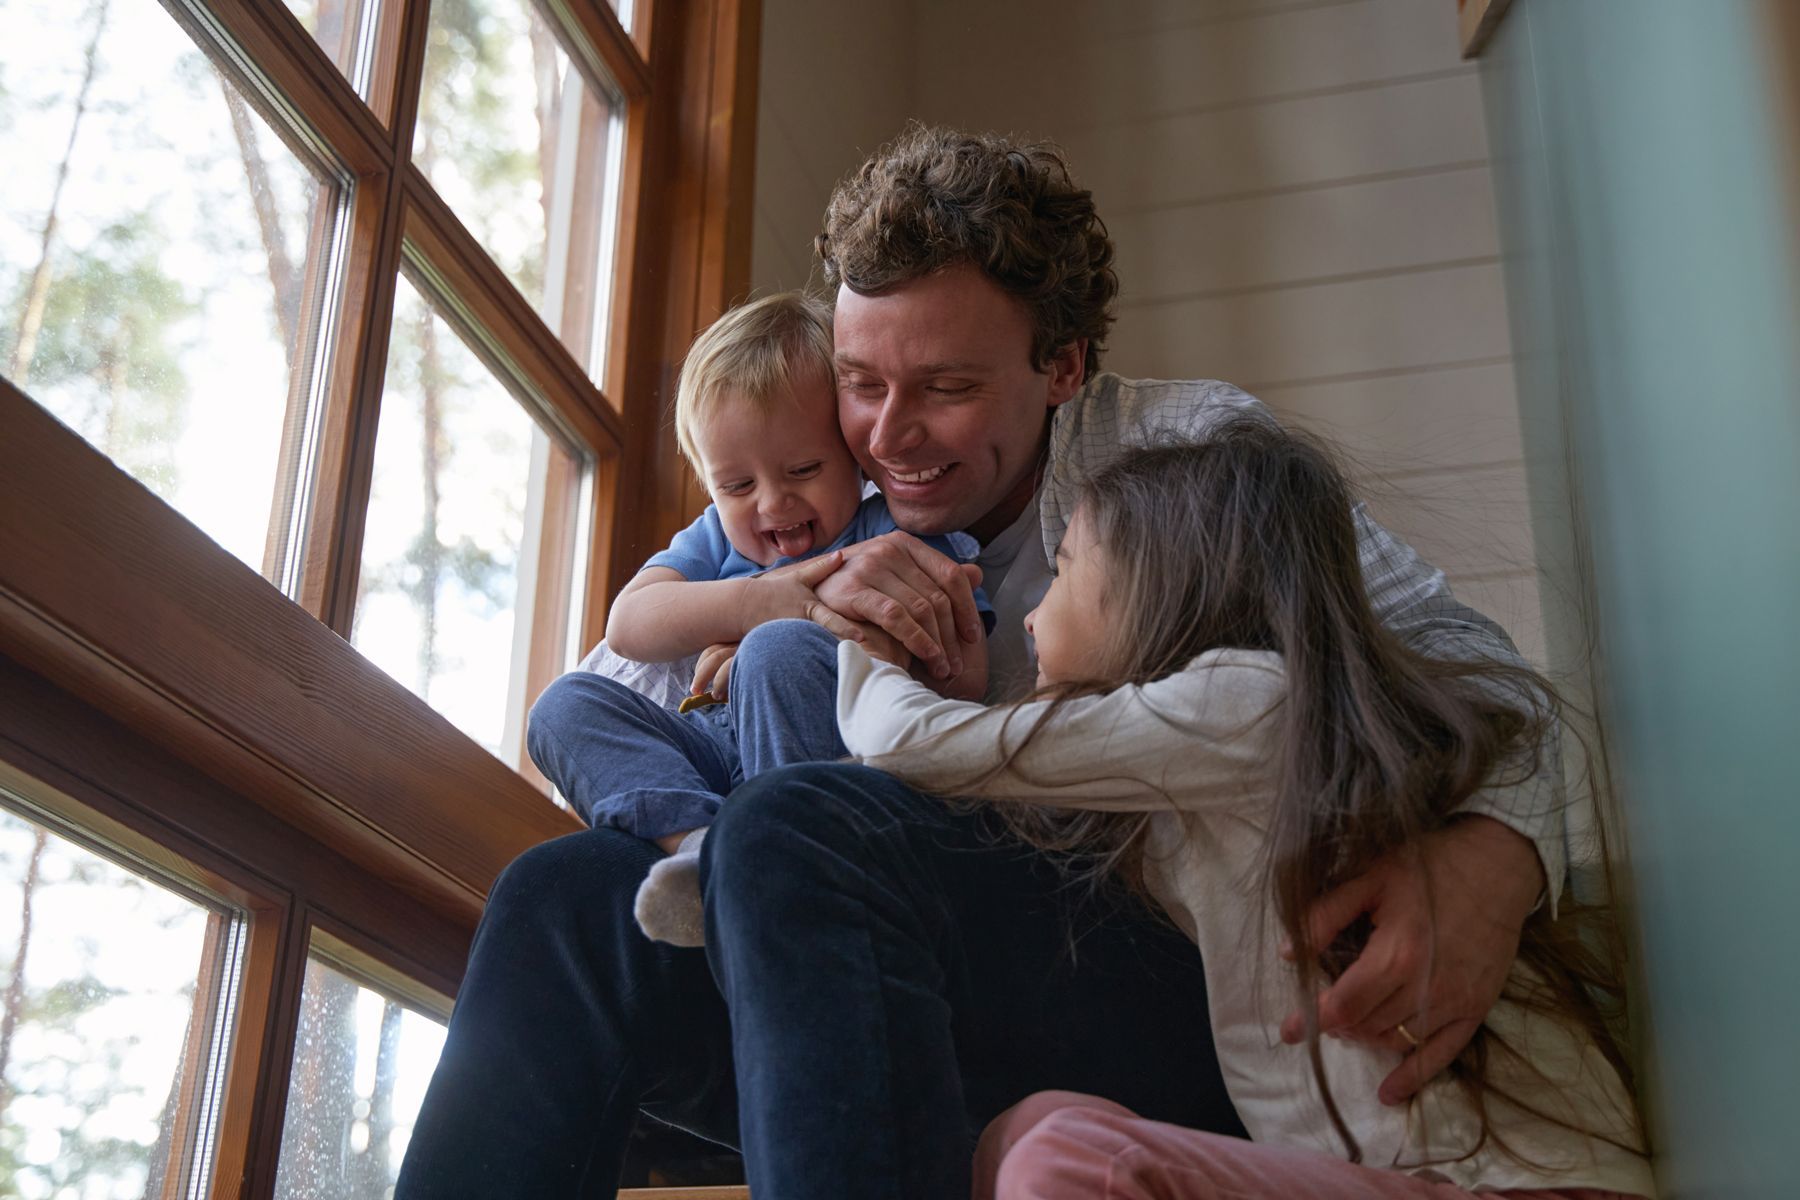 A man is sitting on a window sill with two children.